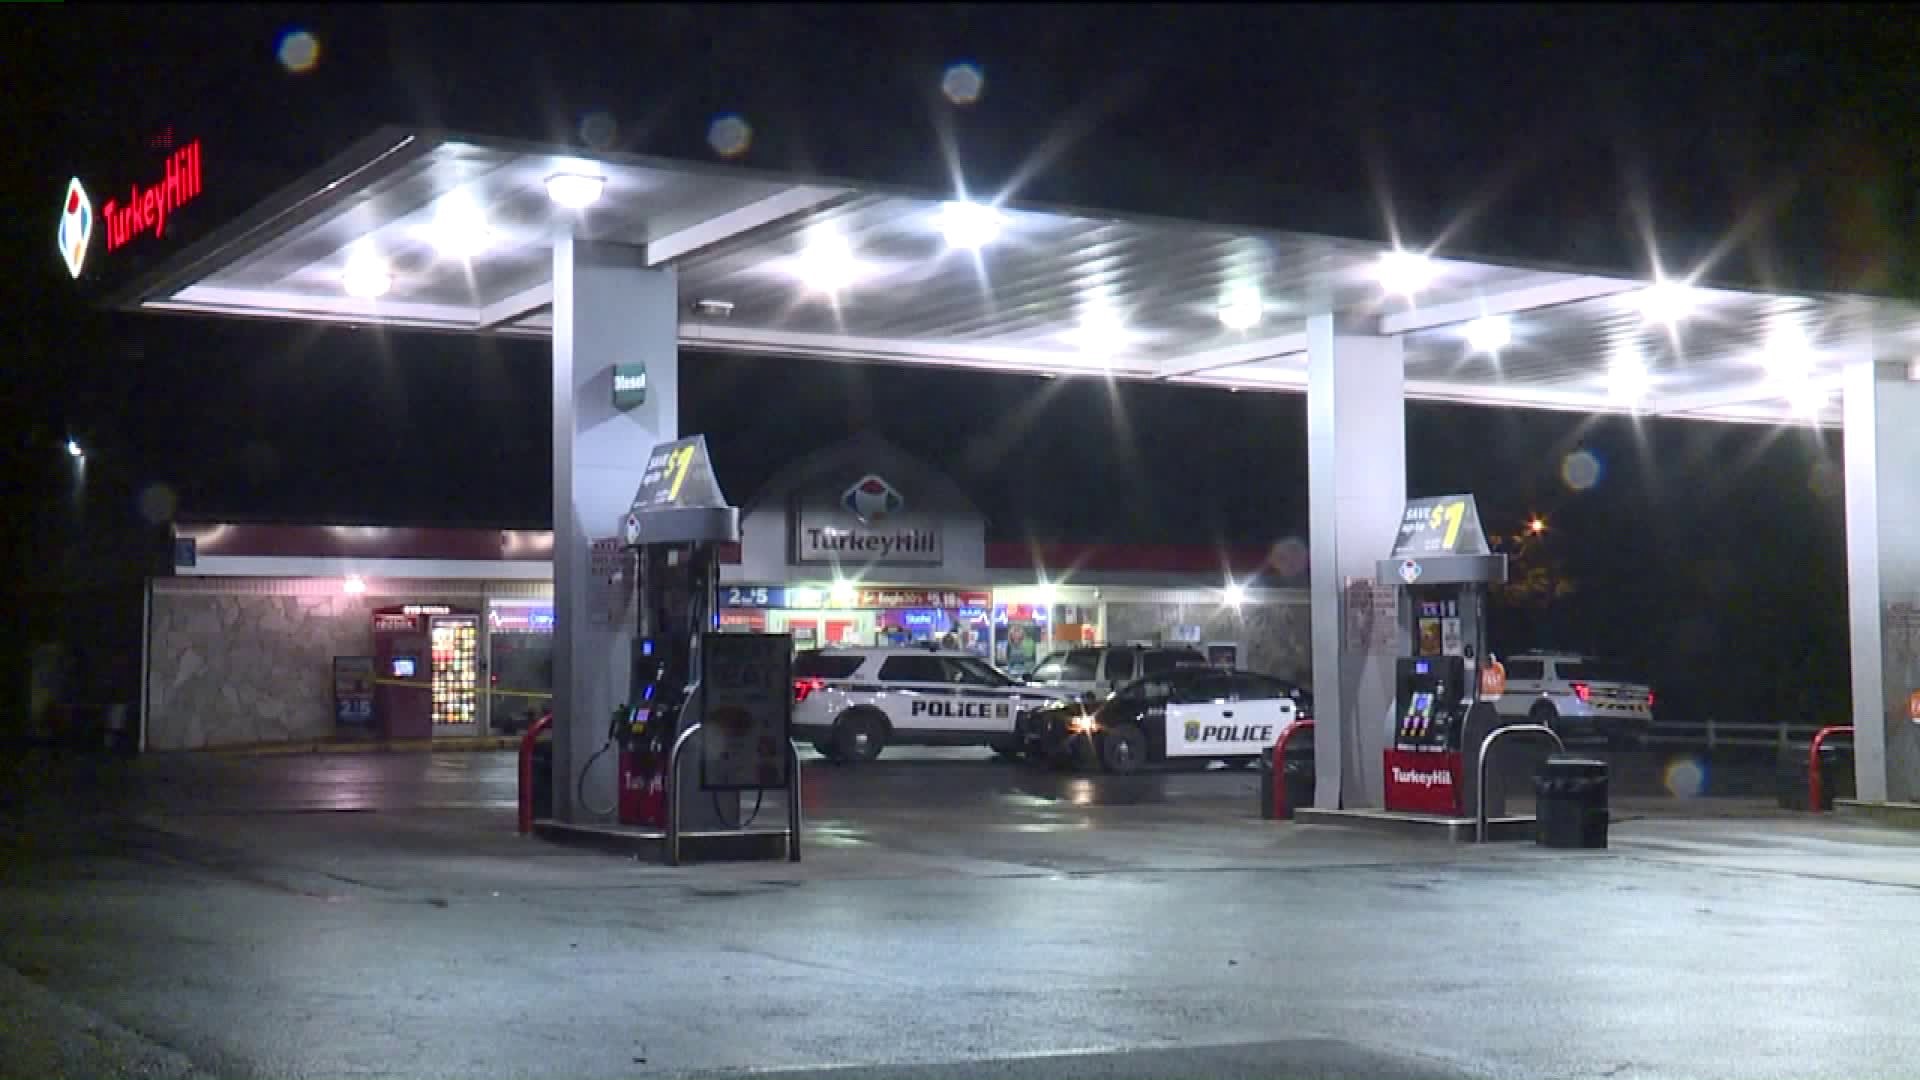 Turkey Hill in Luzerne County Robbed for Third Time